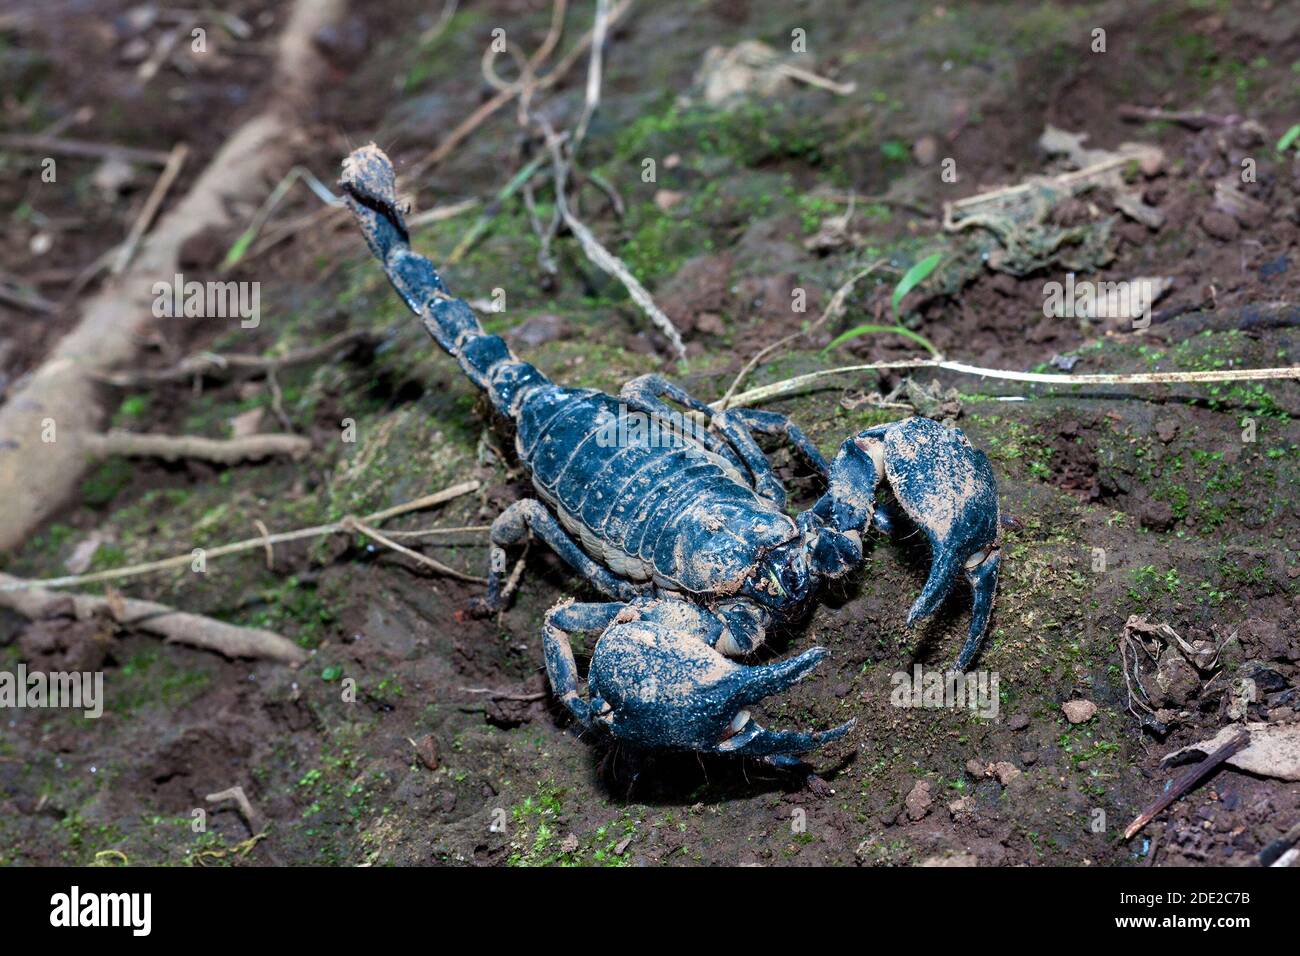 Poisonous scorpion, venomous gland on its tail, 2 large claws on both sides. Stock Photo